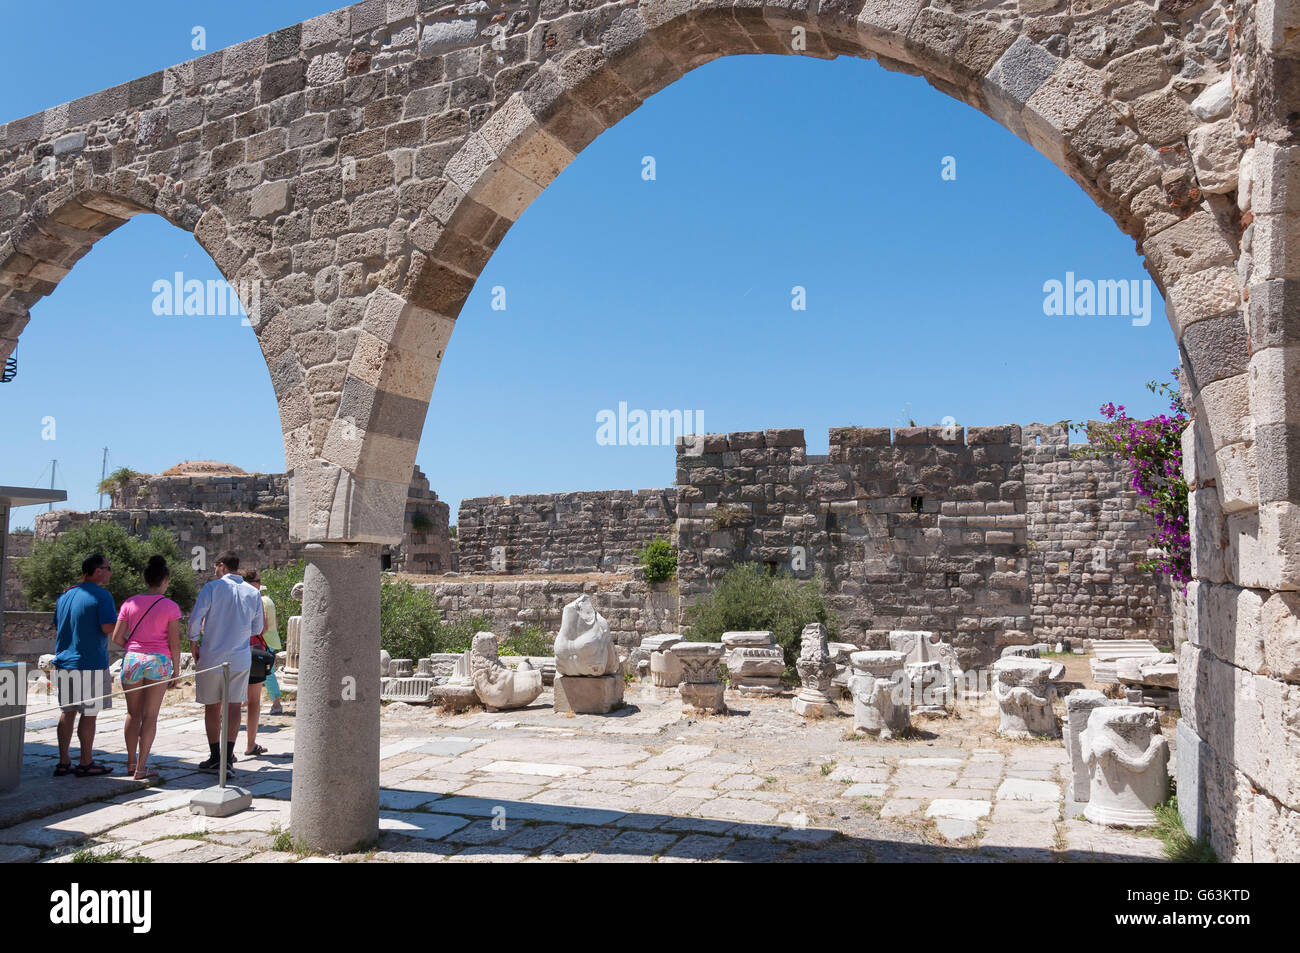 Entrance to The Fortress of Kos, Kos Town, Kos (Cos), The Dodecanese, South Aegean Region, Greece Stock Photo